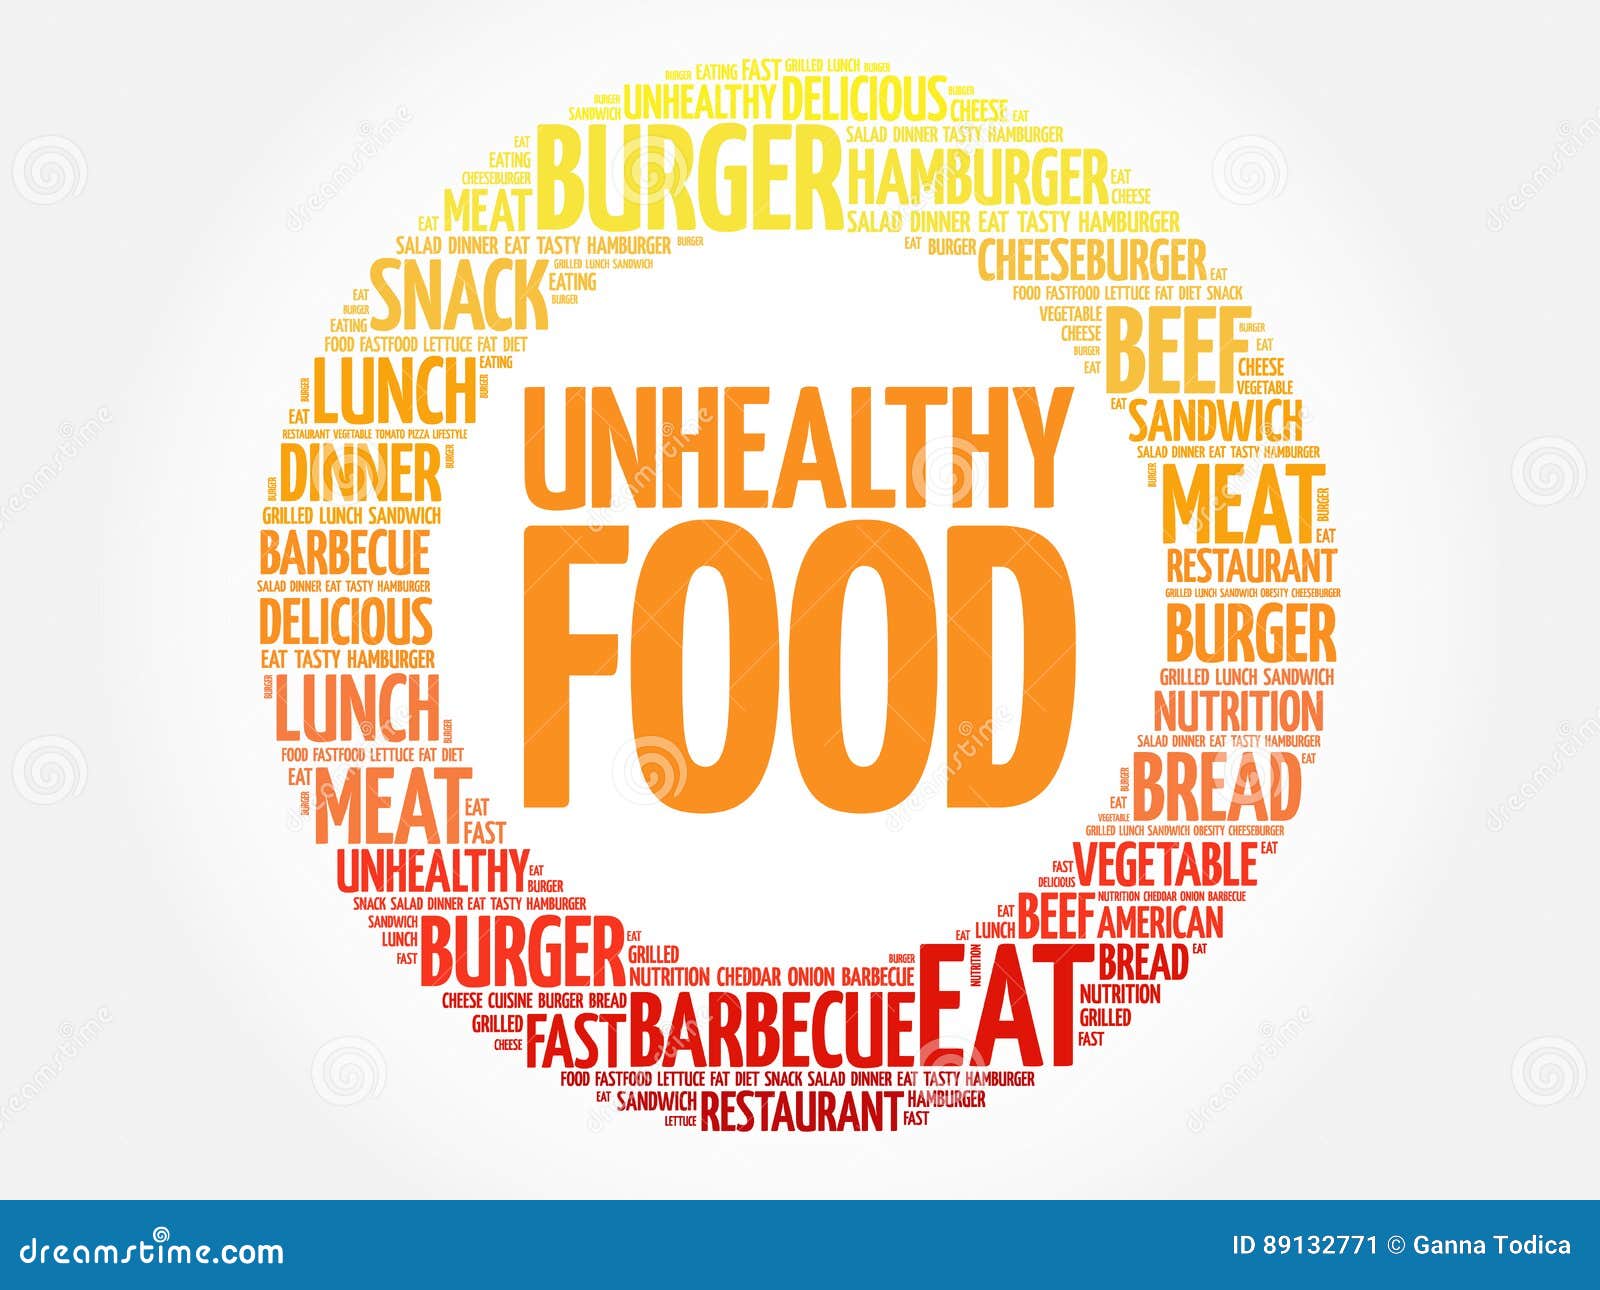 httpsstock illustration unhealthy food word cloud concept image89132771